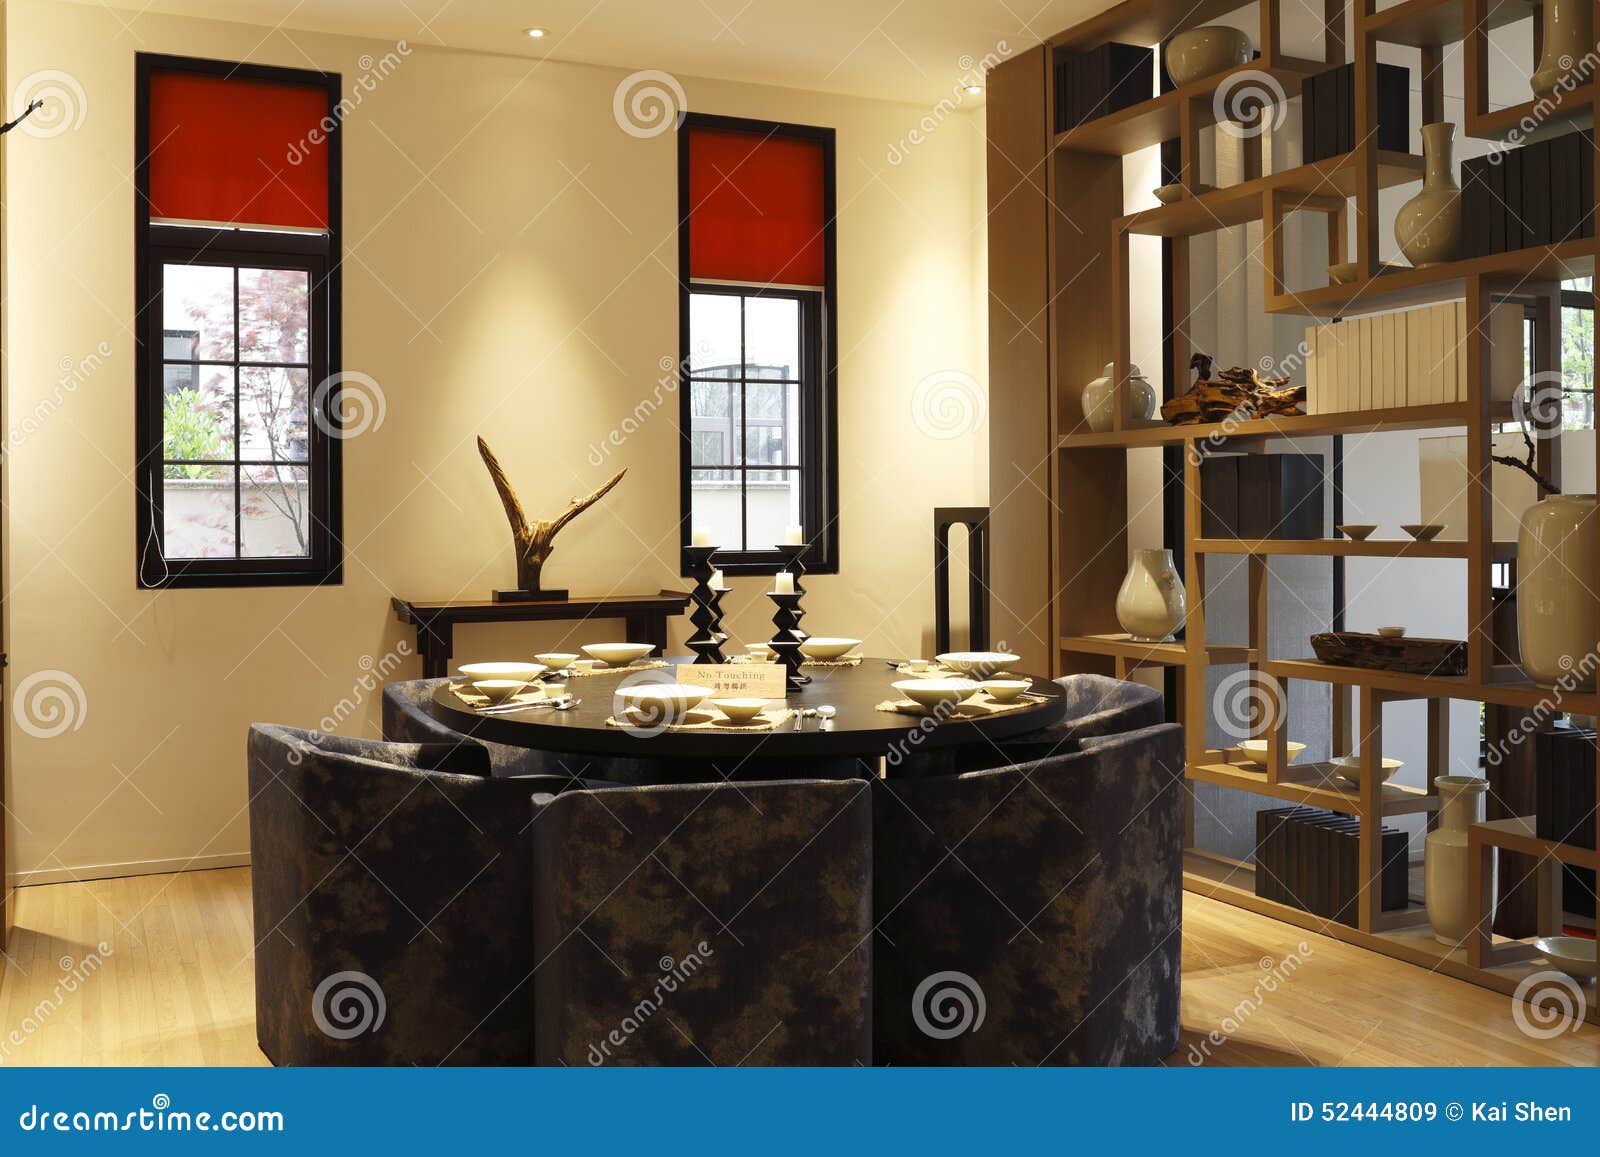 Black Round Table And Red Curtain Decorated Dining Room Stock